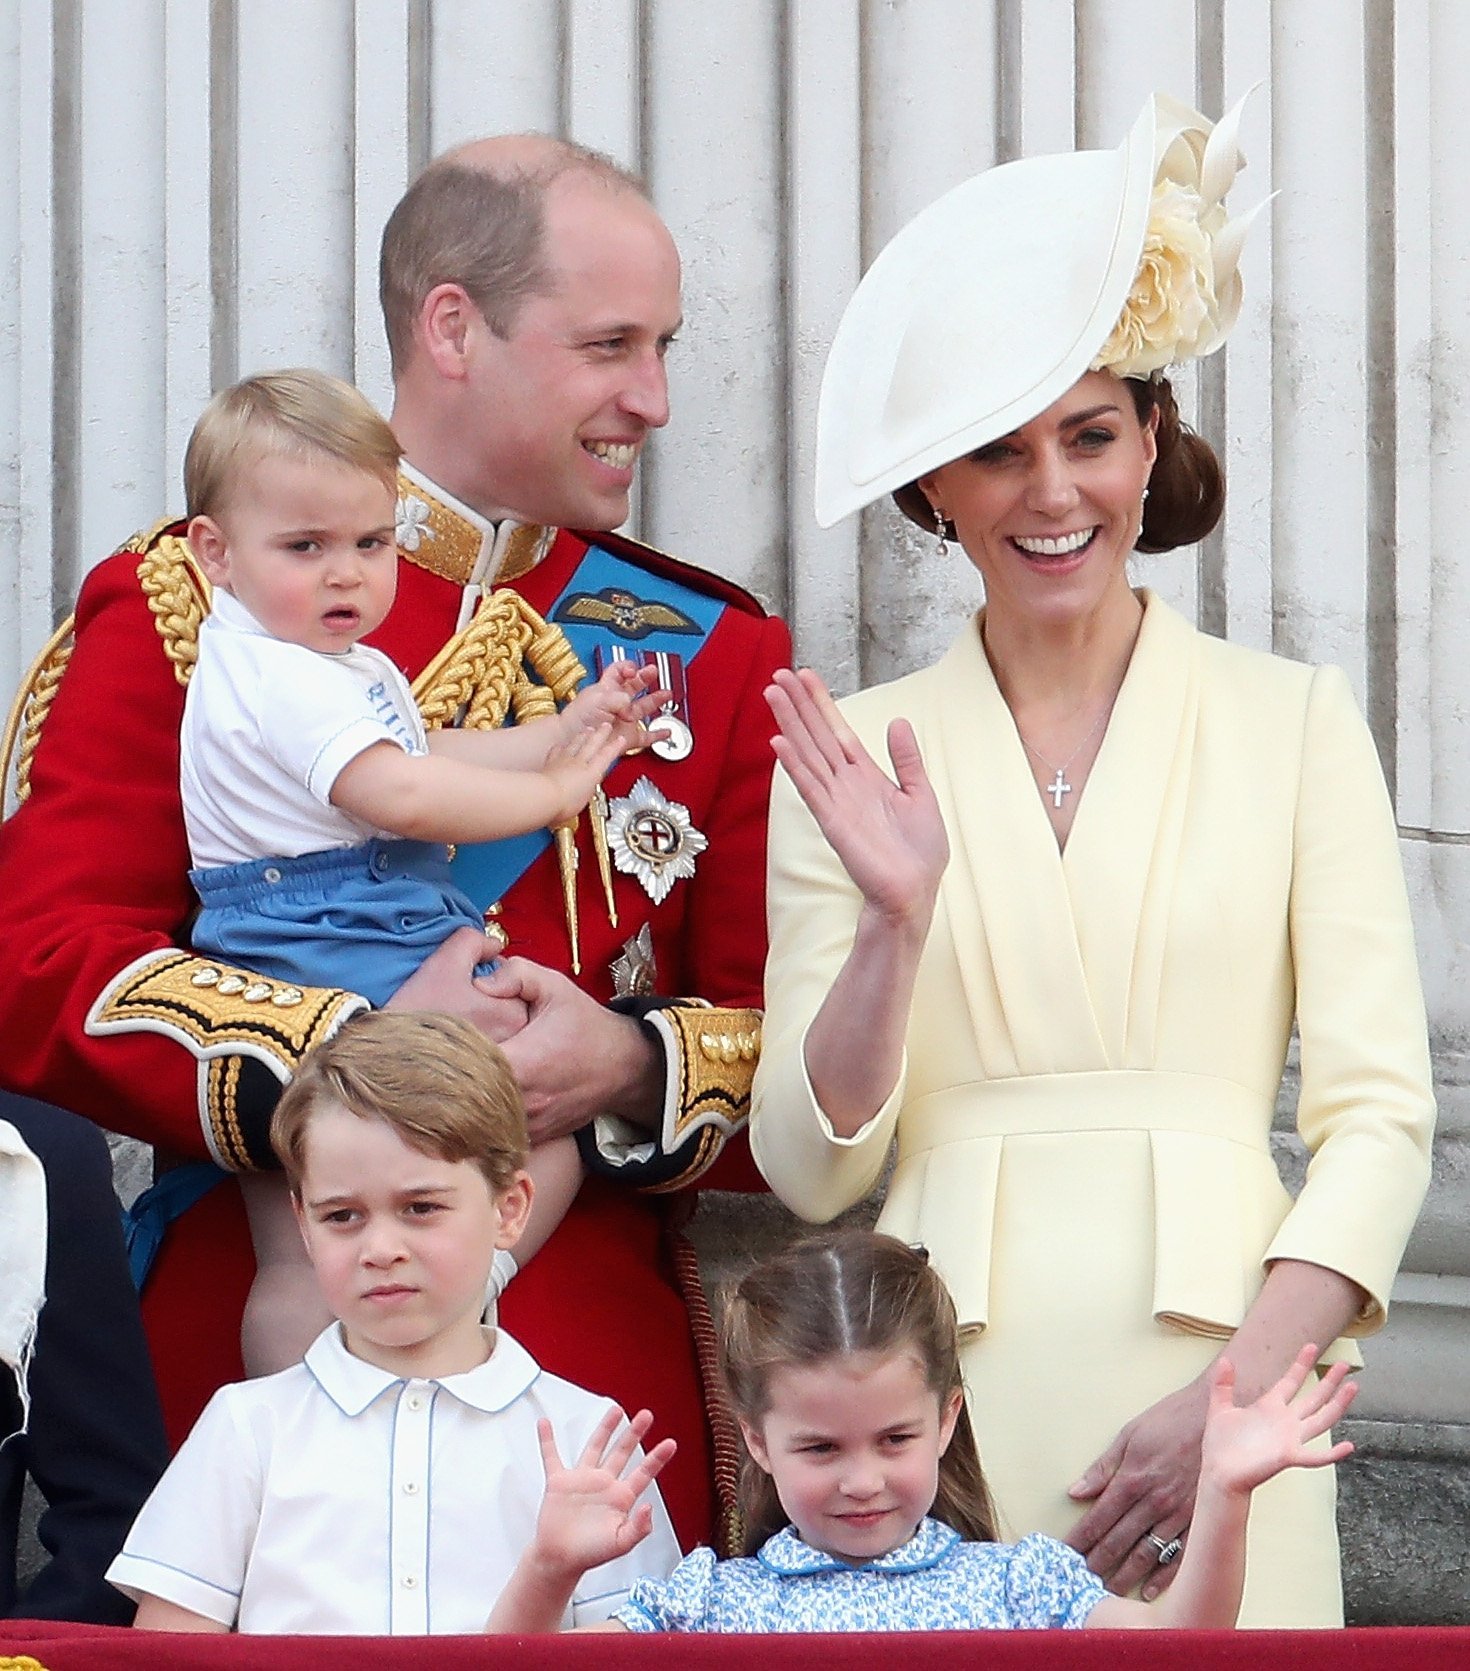 The Duke and Duchess of Cambridge and their three children at Trooping the Color in June 2019 | Photo: Getty Images